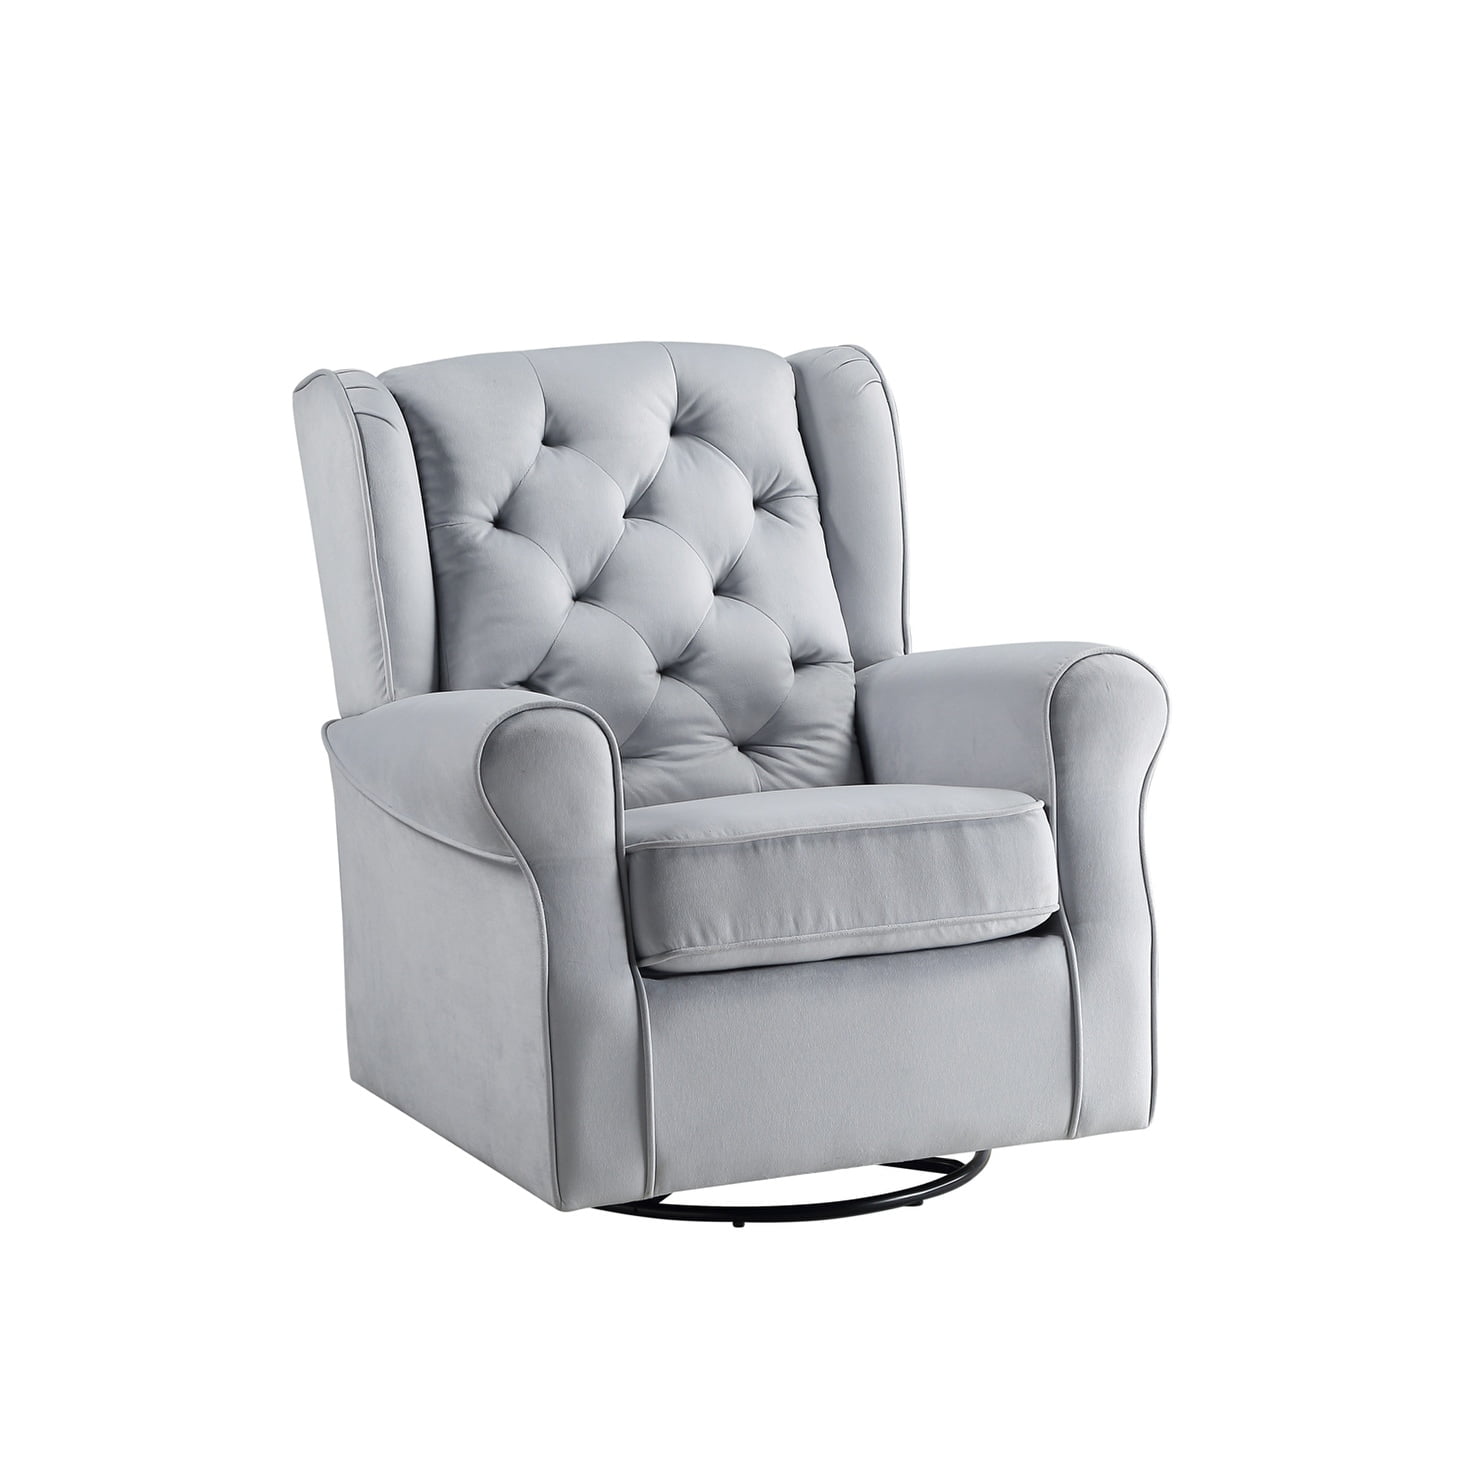 Picture of Acme Furniture LV00924 35 x 34 x 37 in. Zeger Swivel Chair with Glider, Gray Fabric